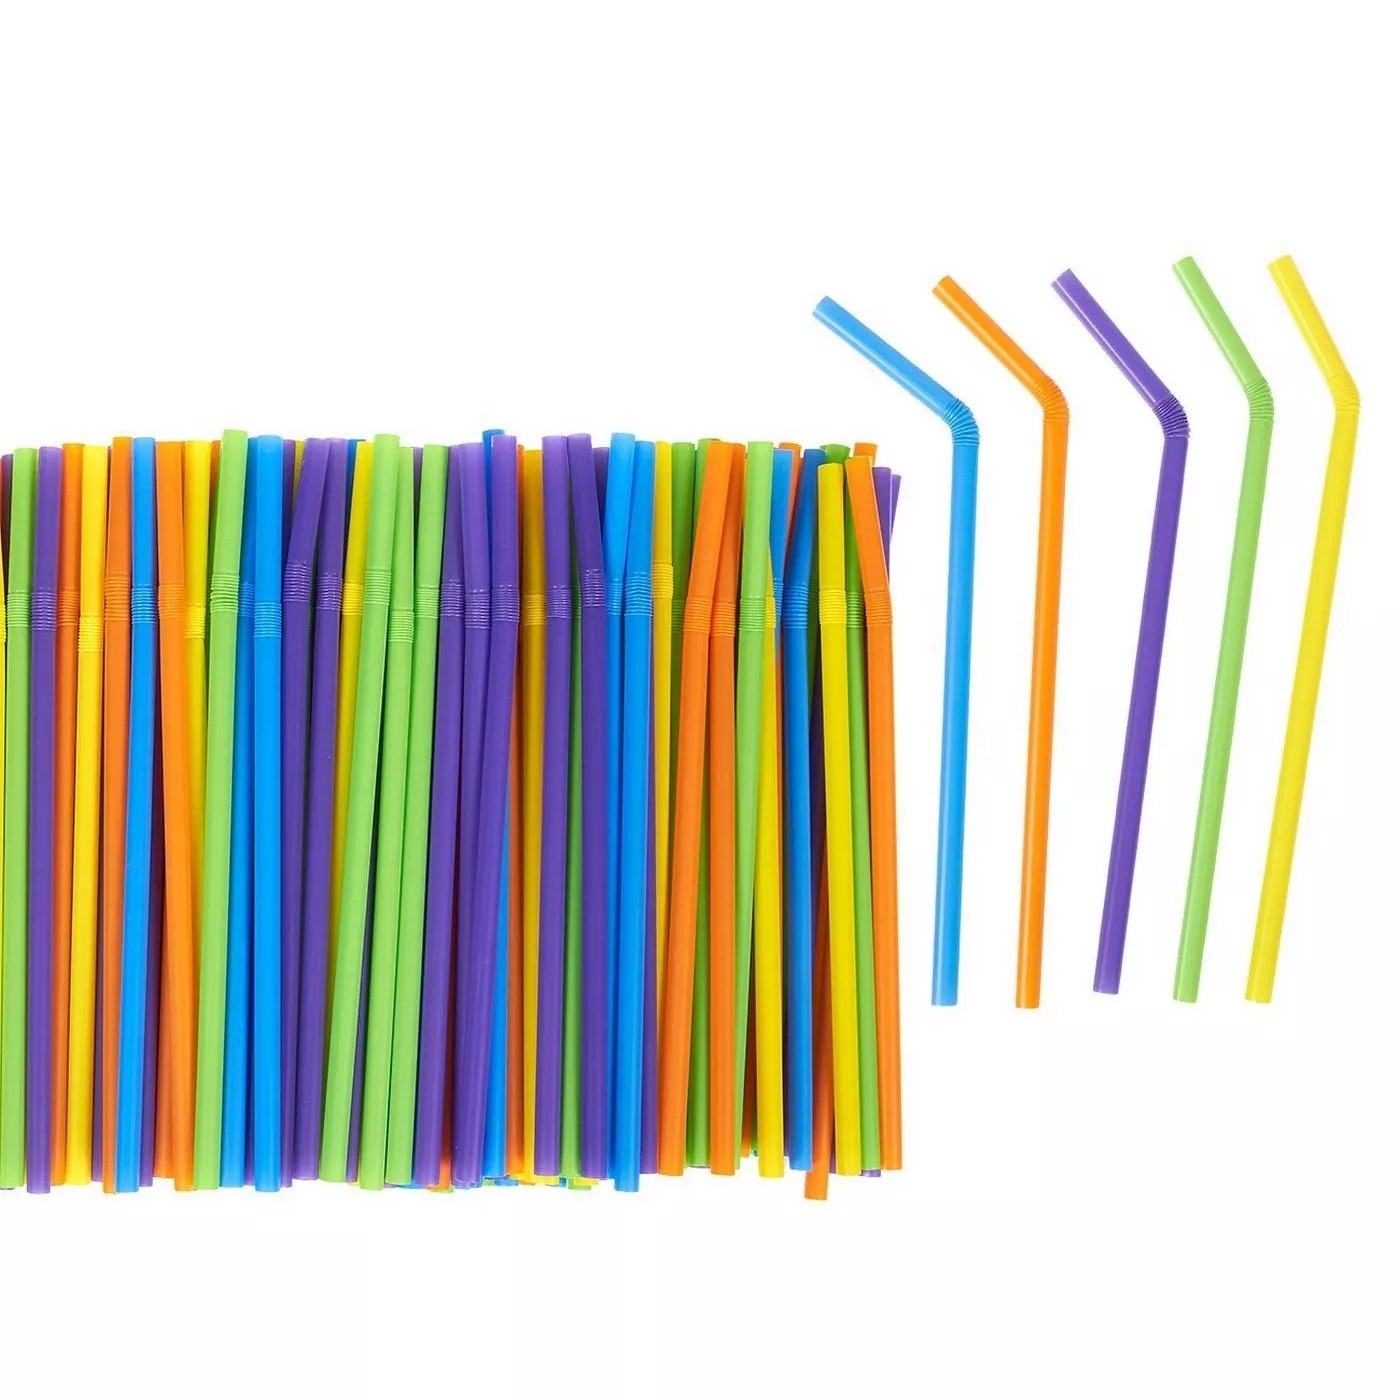 The colorful straws